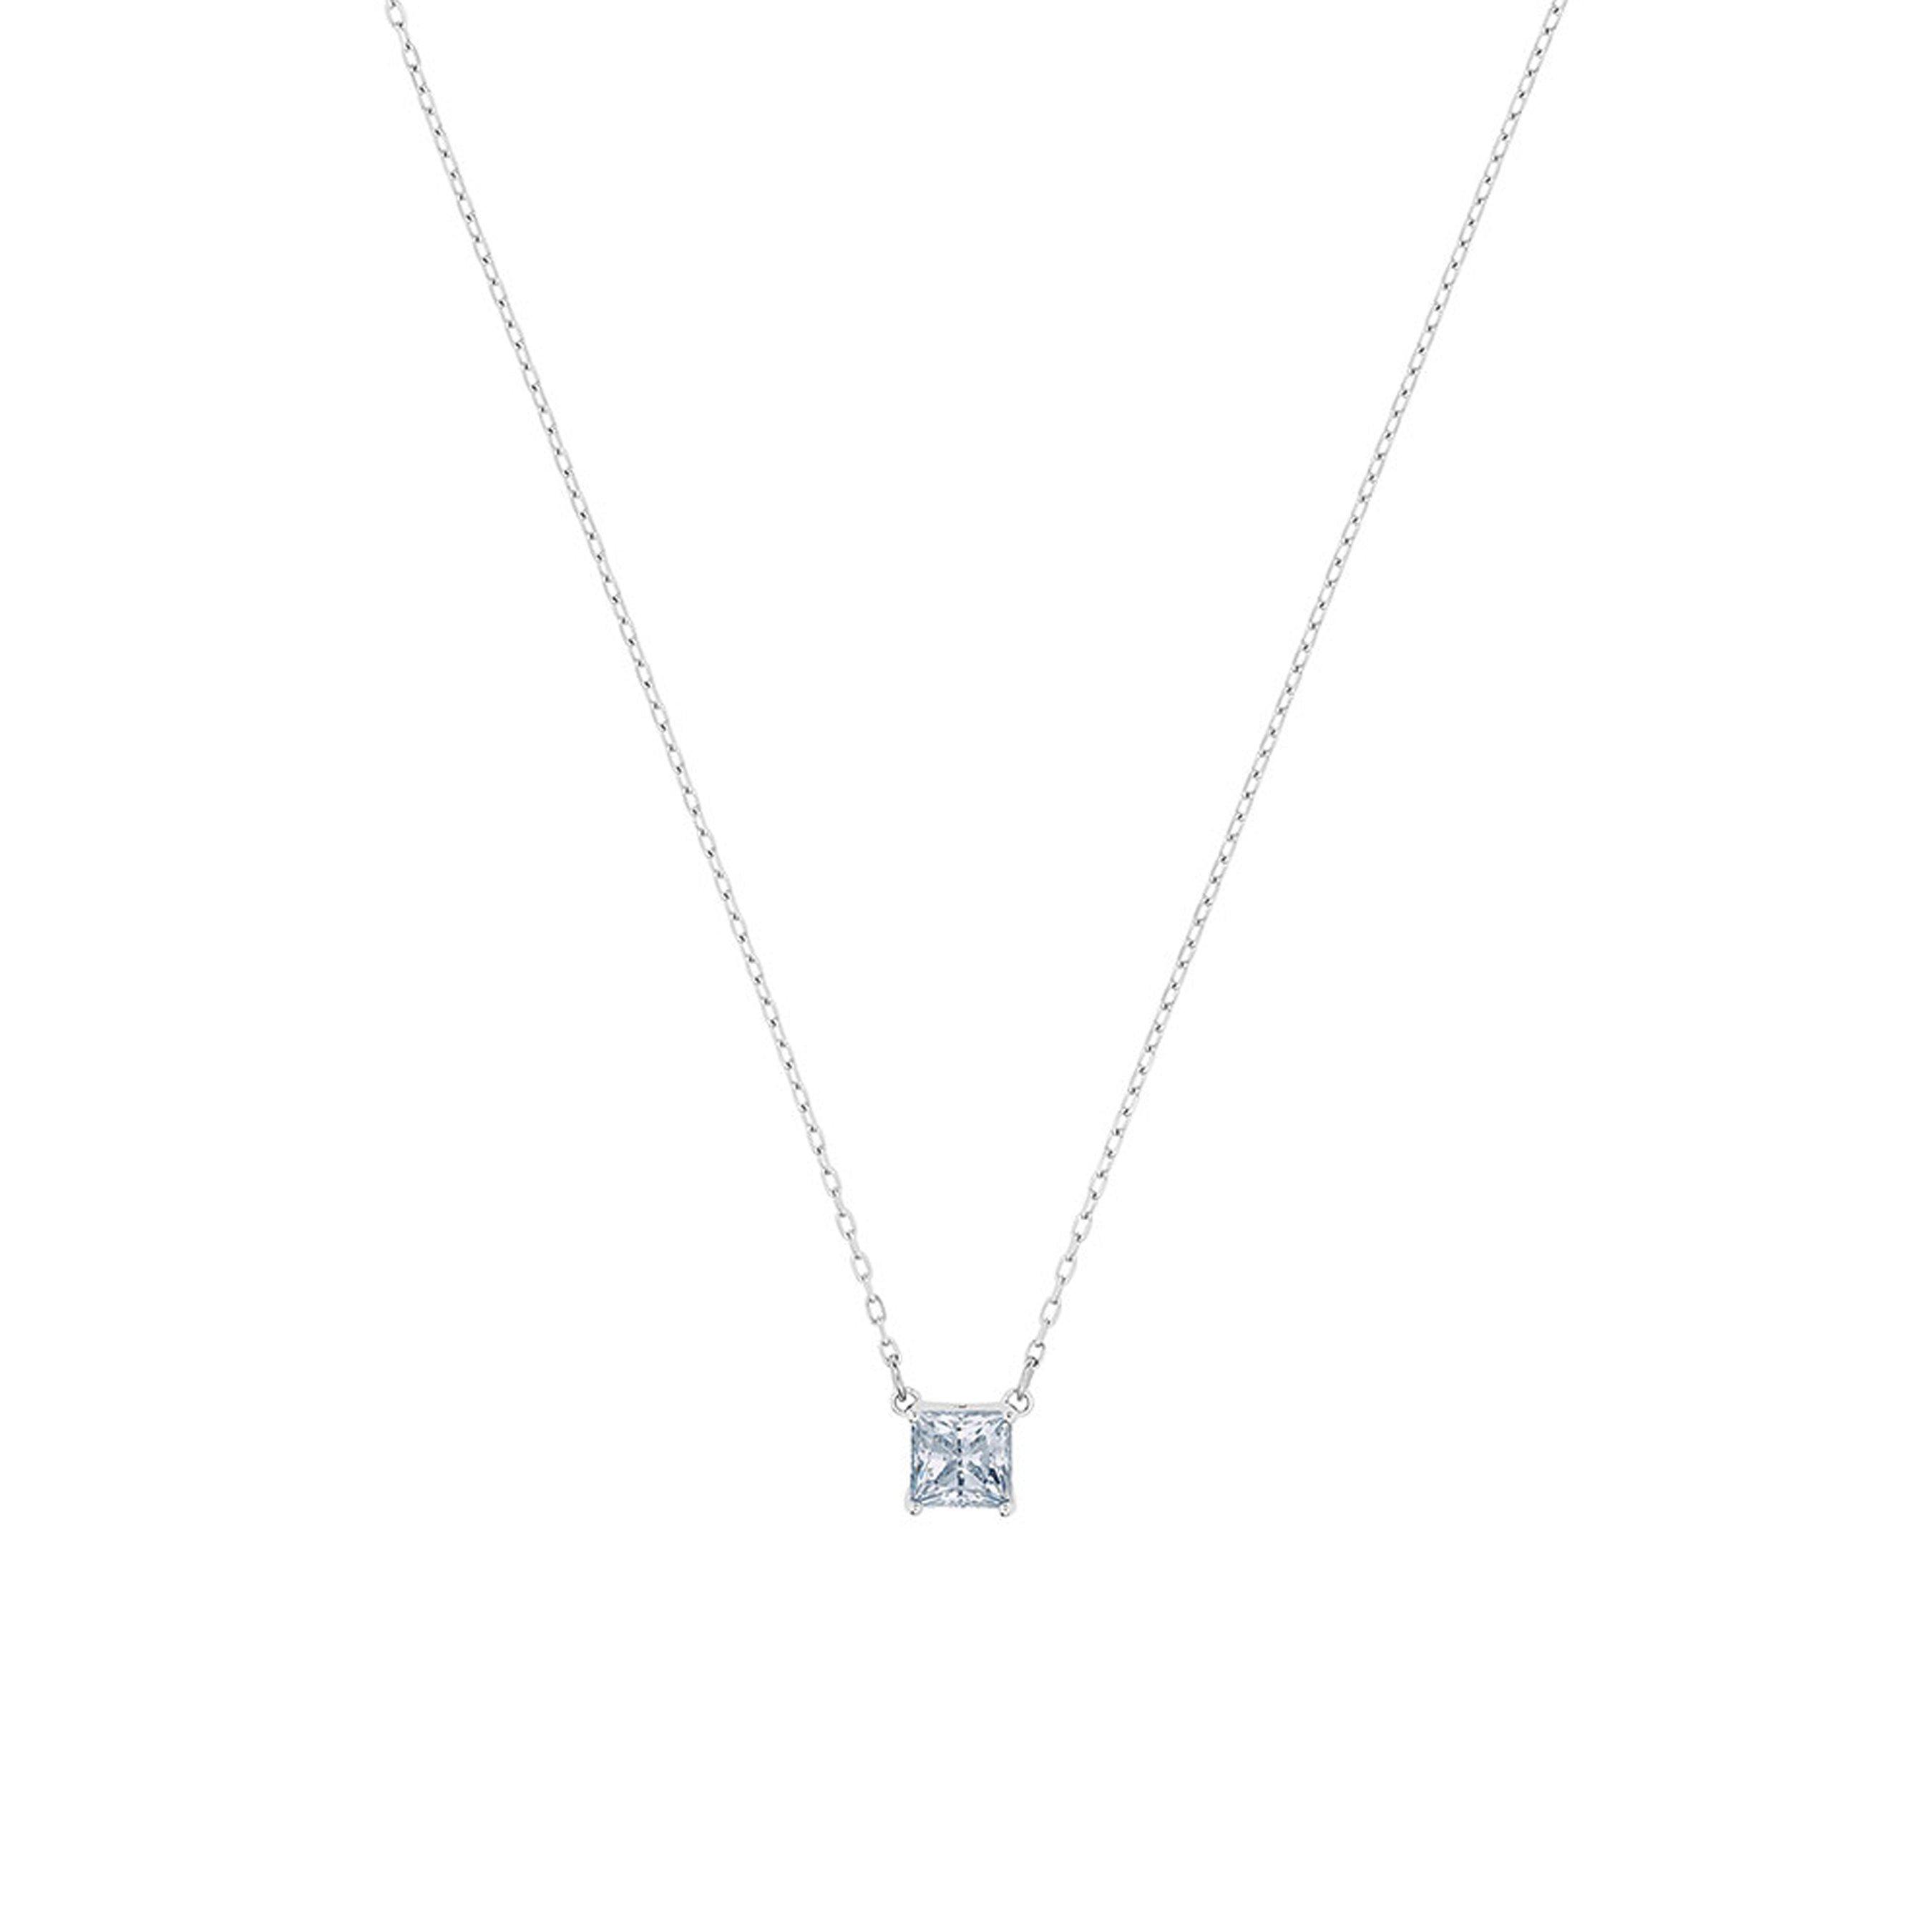 Swarovski Attract Crystal Necklace | 0118565 | Beaverbrooks the Jewellers